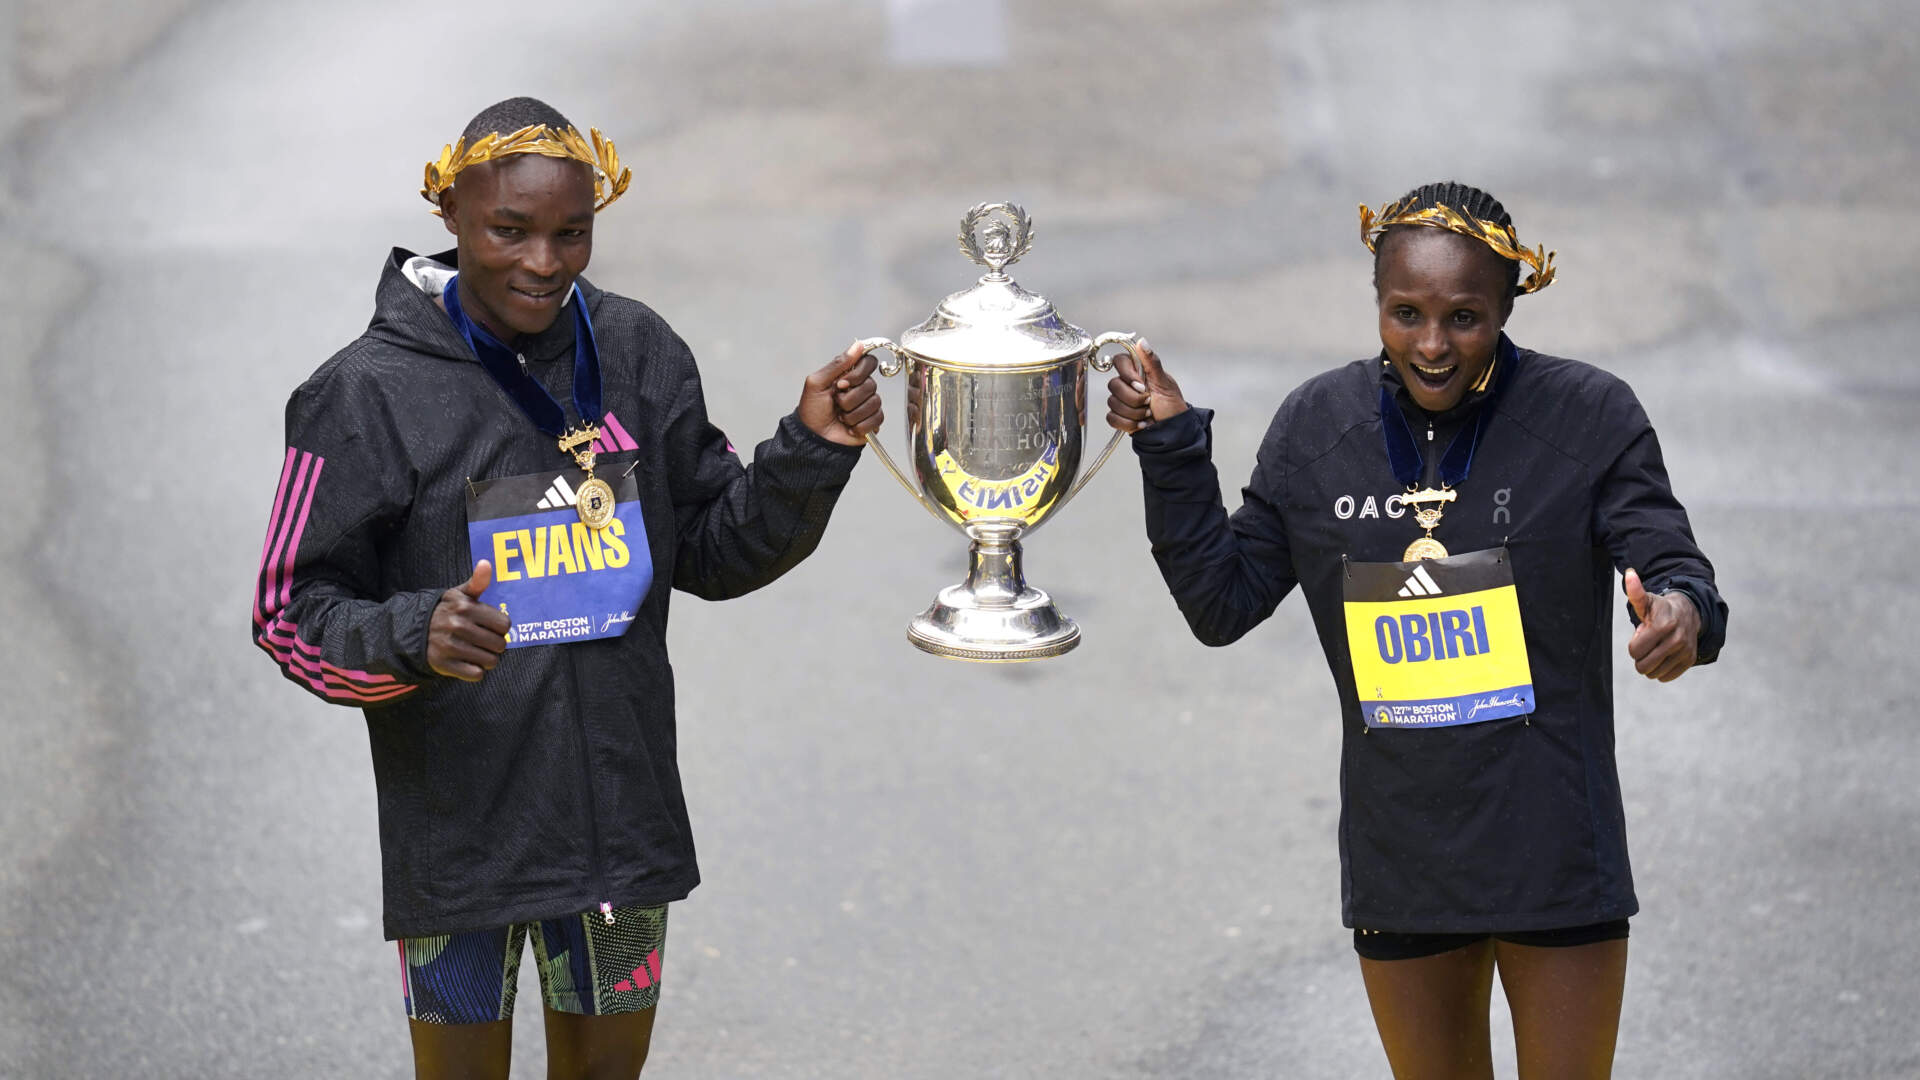 Evans Chebet, left, and Hellen Obiri, both of Kenya, pose on the finish line after winning the men's and women's division of the Boston Marathon, Monday, April 17, 2023. (Charles Krupa/AP)